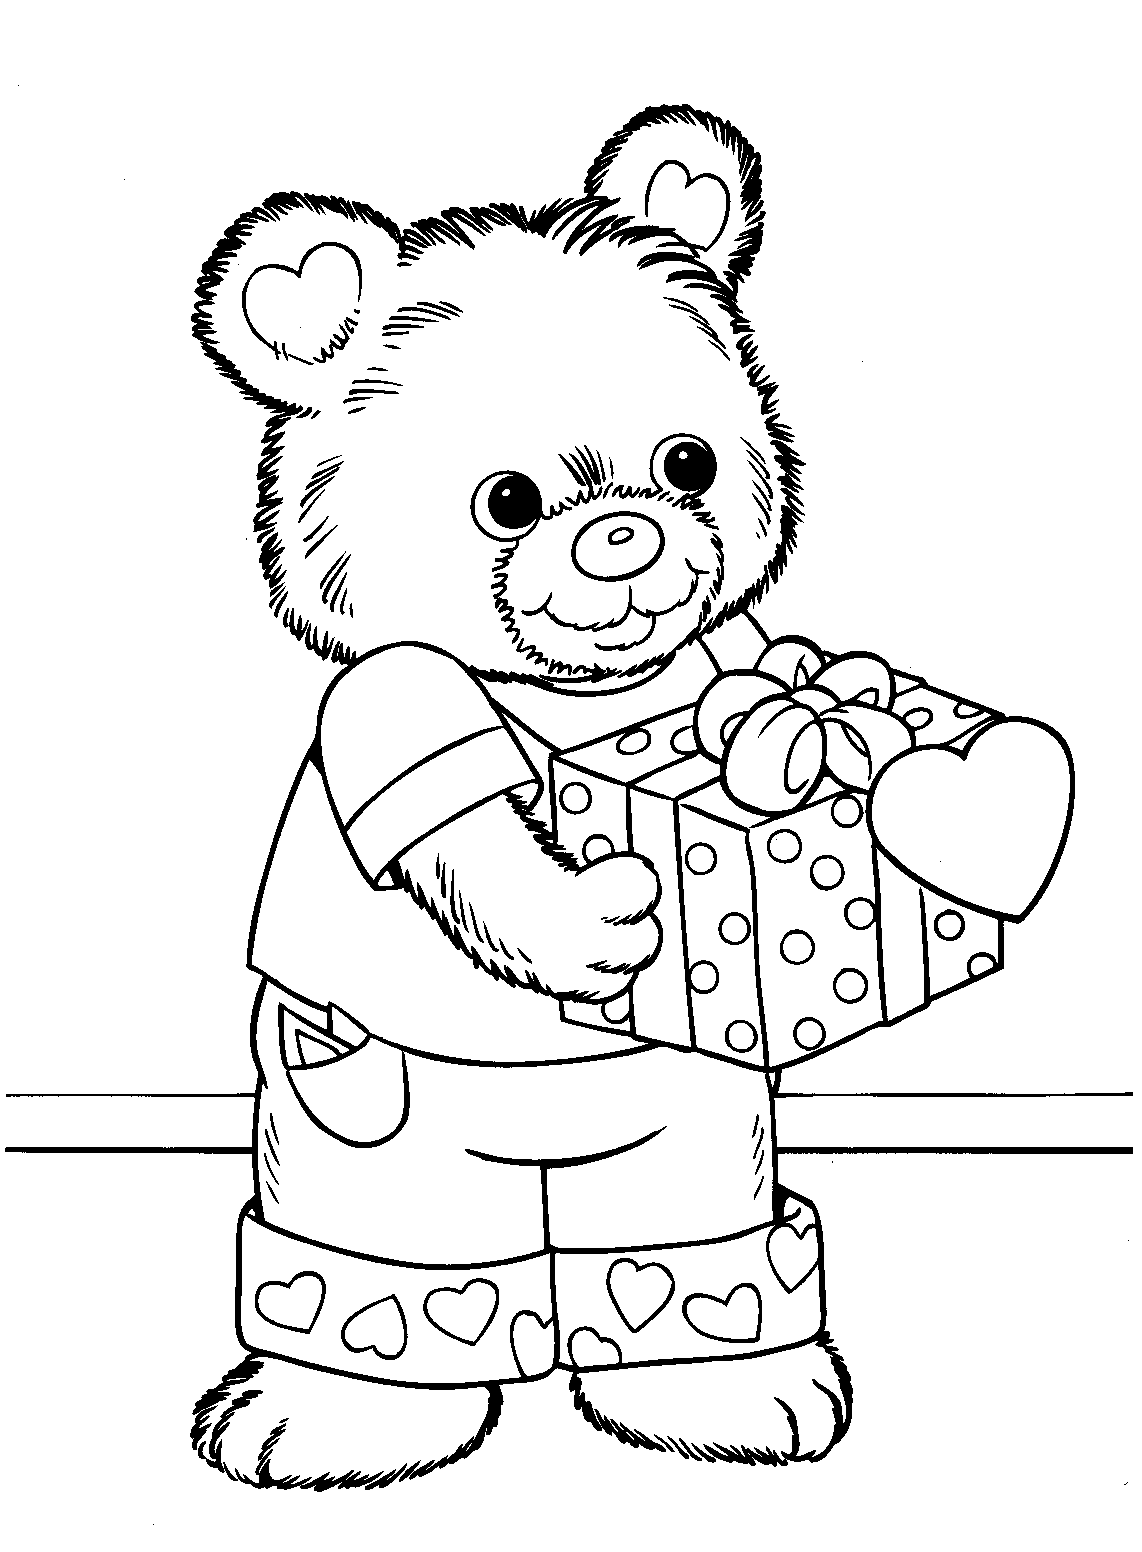 Coloring Pages Valentines Day Free Printable - Coloring Home